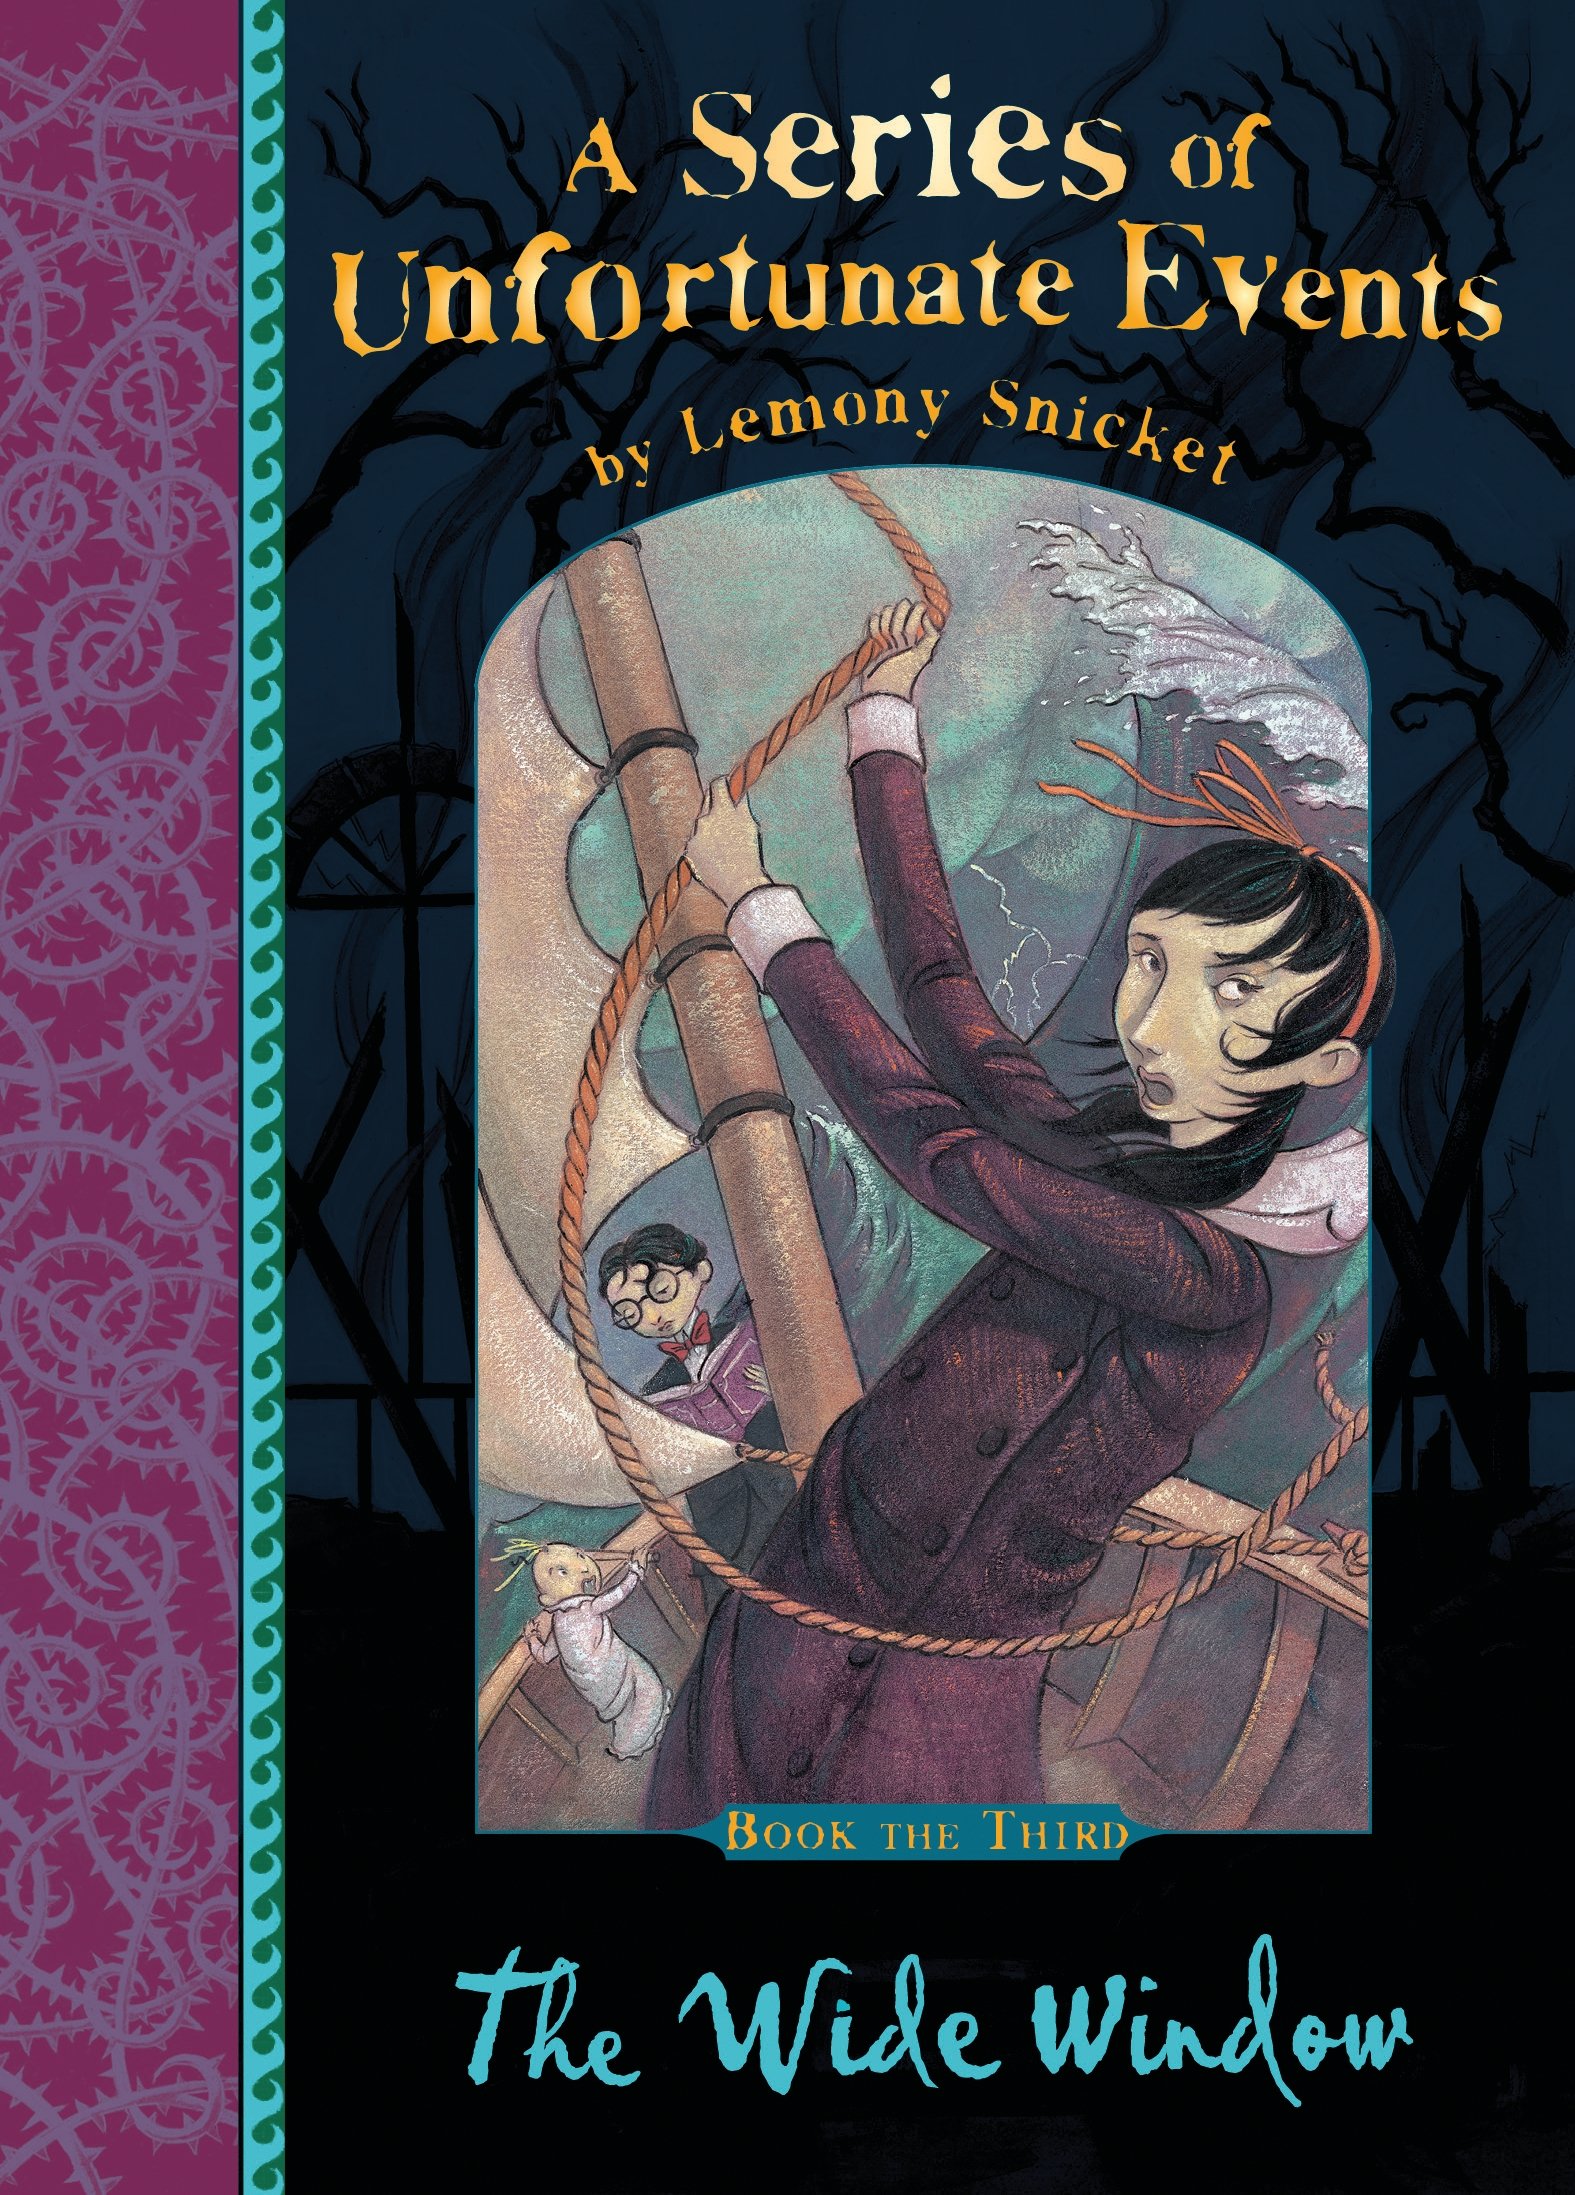 The Wide Window (A Series of Unfortunate Events Book 3) AppuWorld